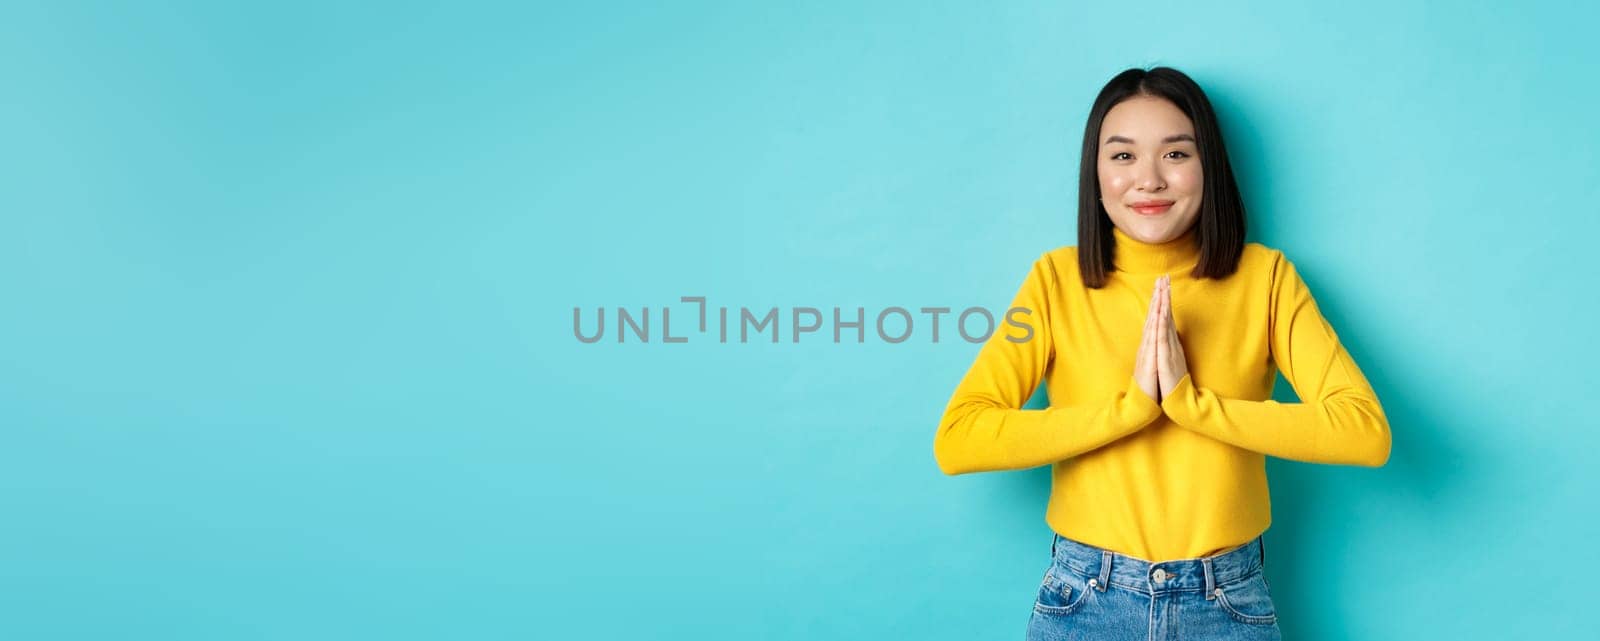 Cute asian woman in trendy outfit saying thank you, holding hands in namaste, begging gesture, smiling grateful at camera, standing over blue background.